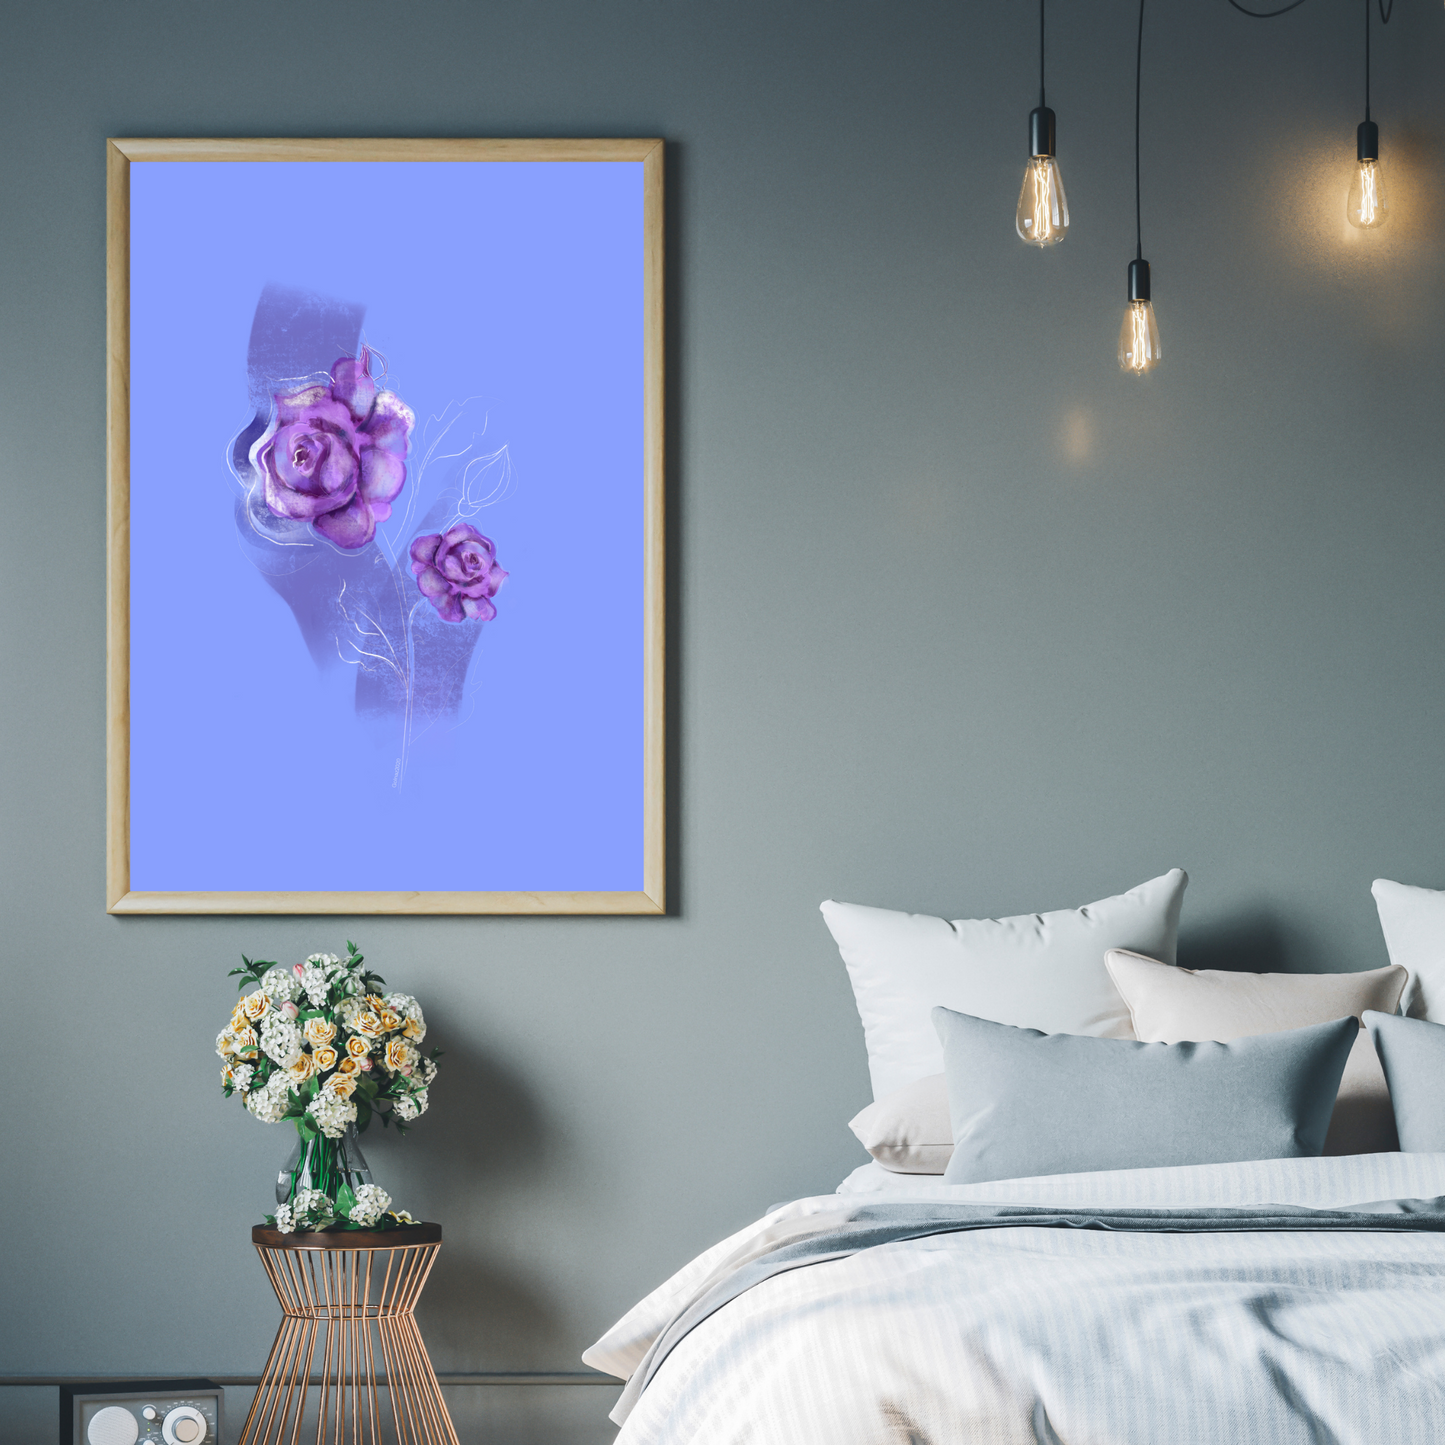 An example of the Rose painting by ArisaTeam in a bedroom